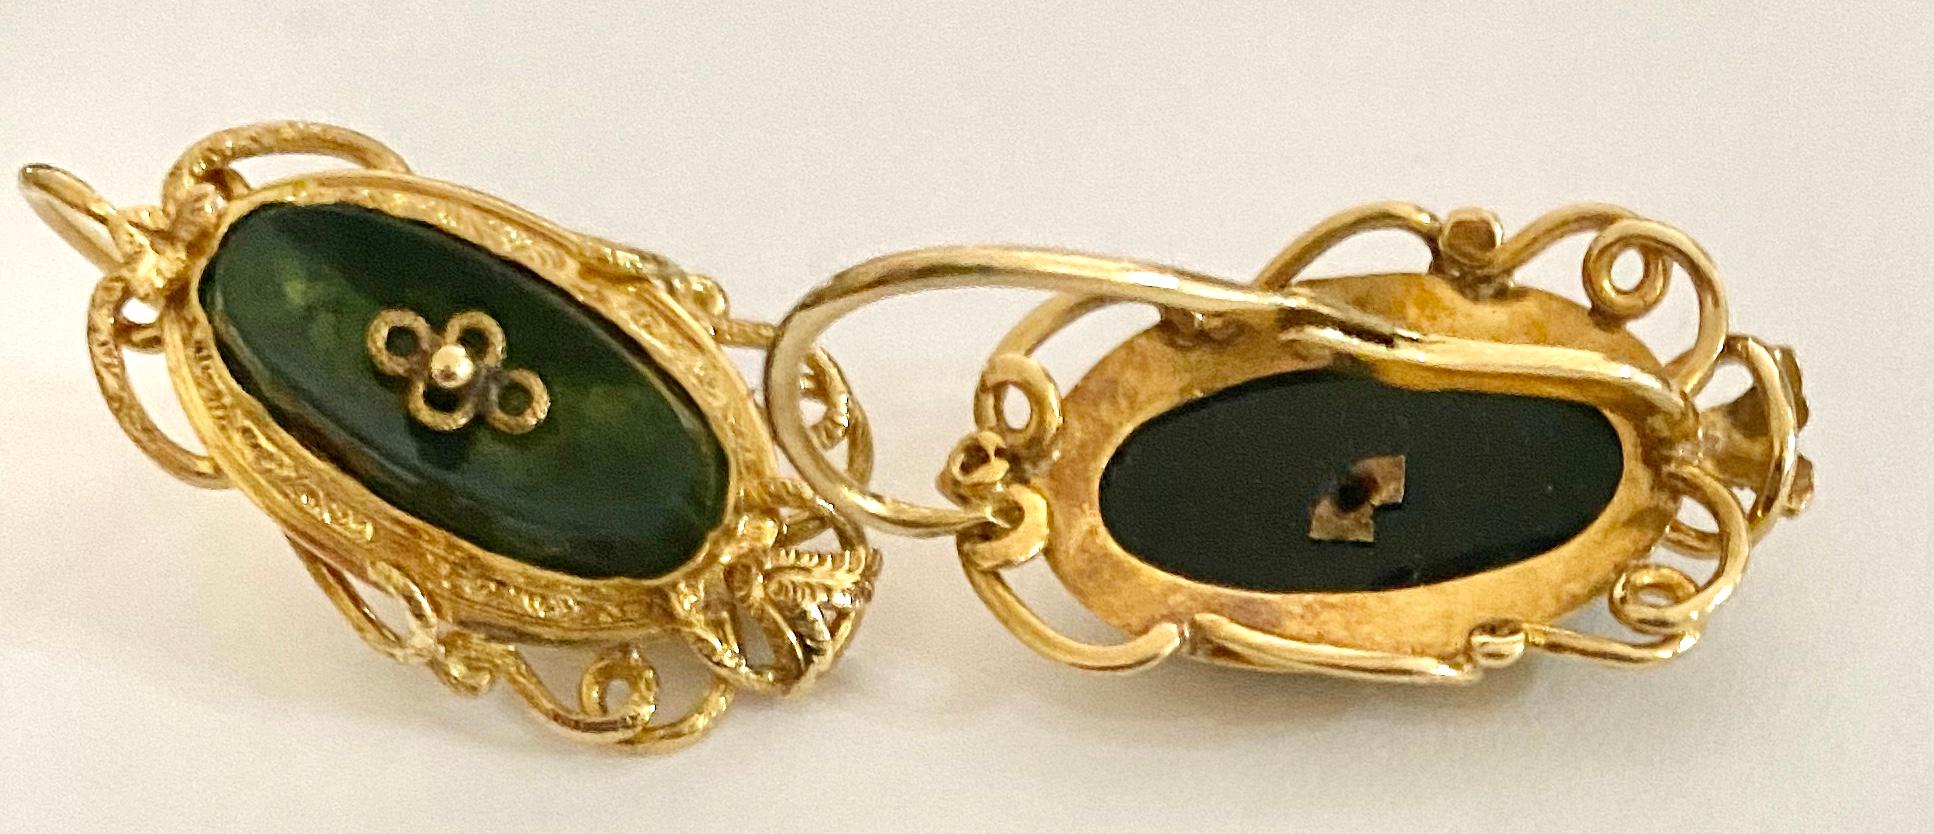 Petit Parure, 18 Karat Yellow Gold Boche and Earrings, Brussels  1850 For Sale 3